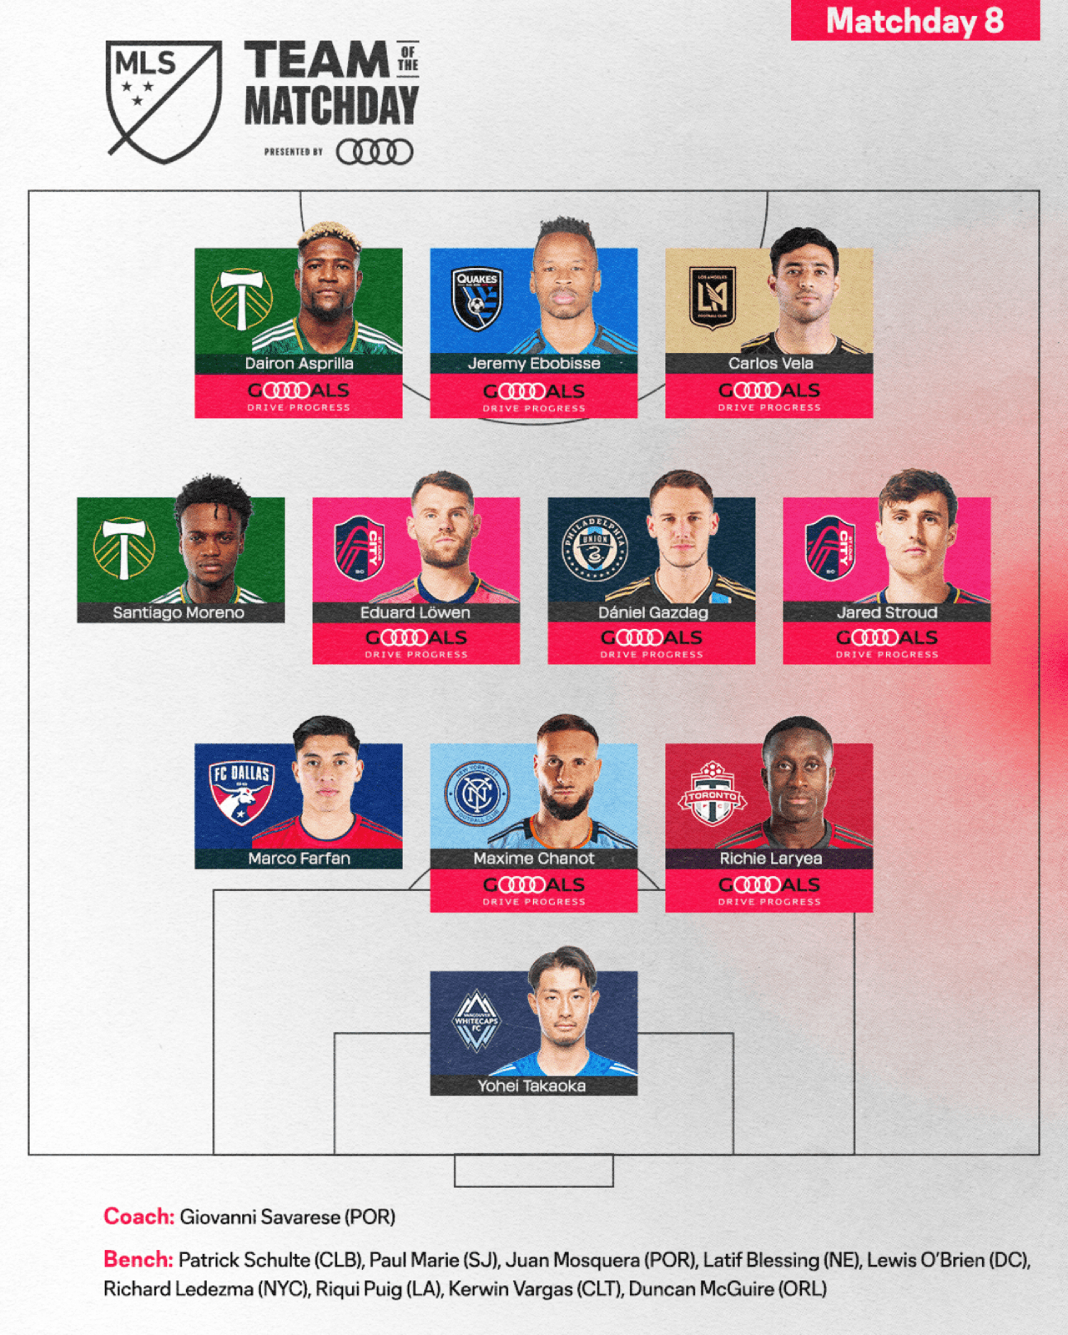 Team of the Matchday 8